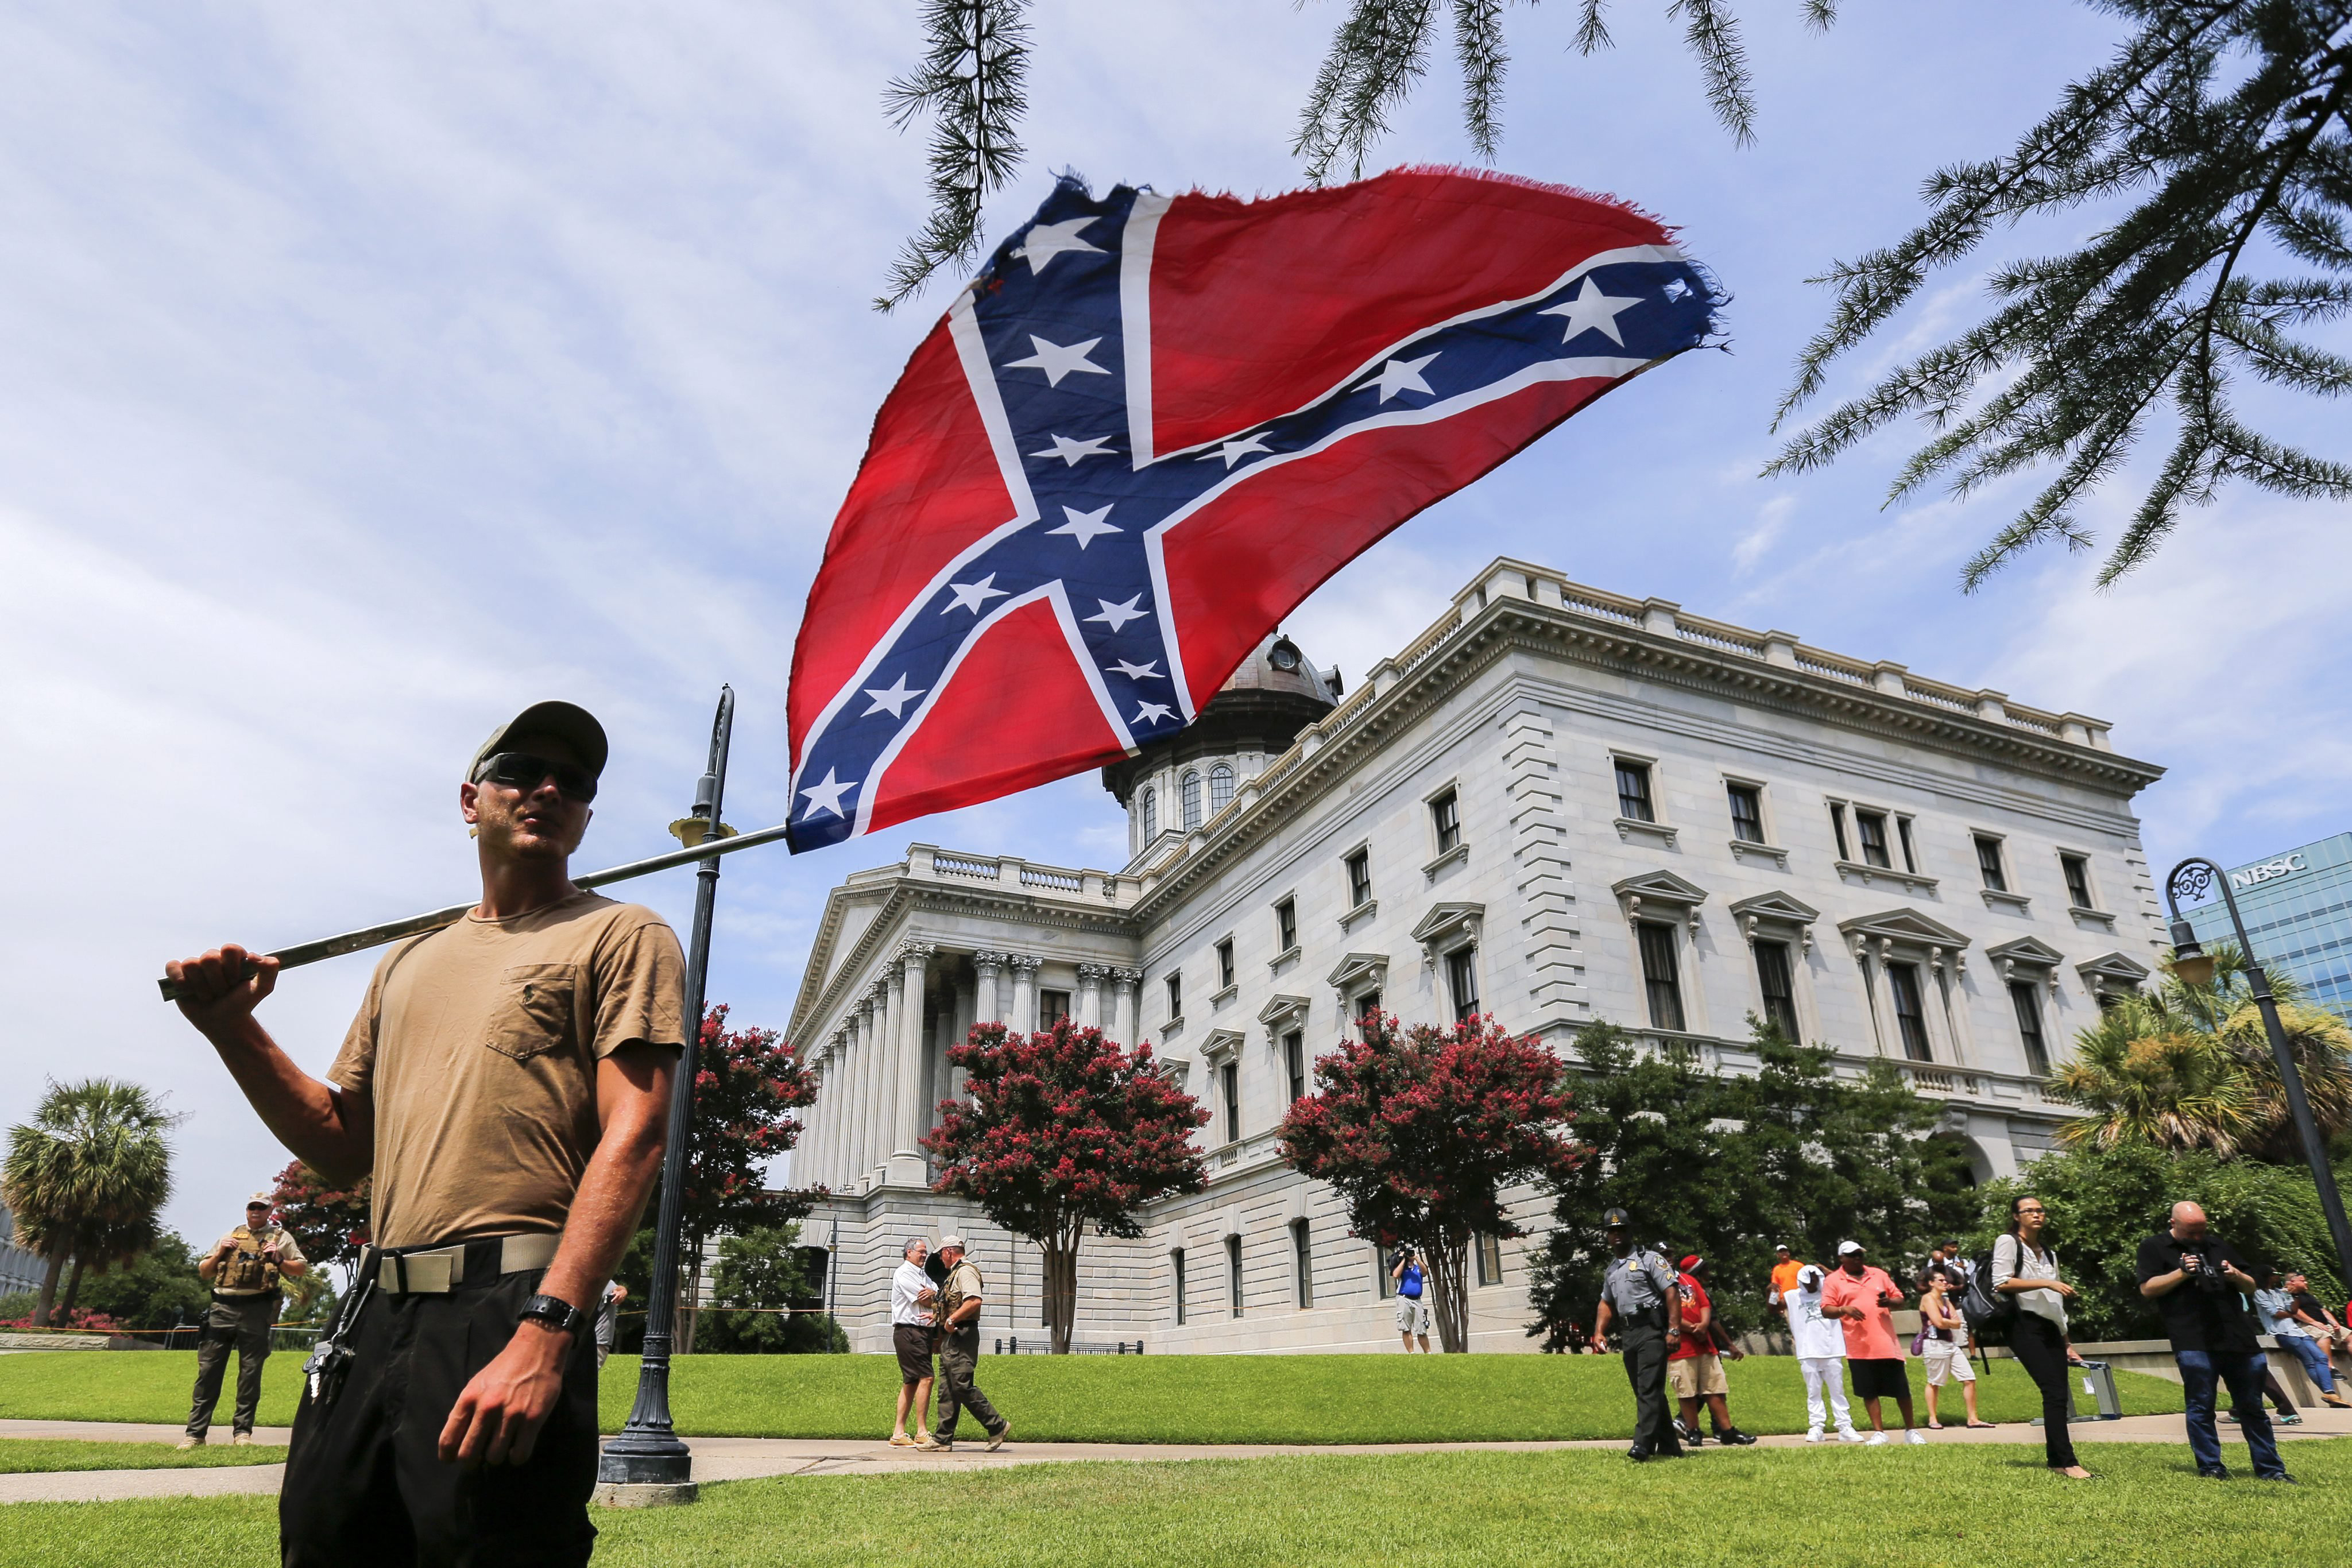 A man displays a Confederate battle flag during New Black Panther Party and Ku Klux Klan rallies on the grounds of the South Carolina Capitol in Columbia, S.C. on July 18, 2015. (Erik S. Lesser—EPA)